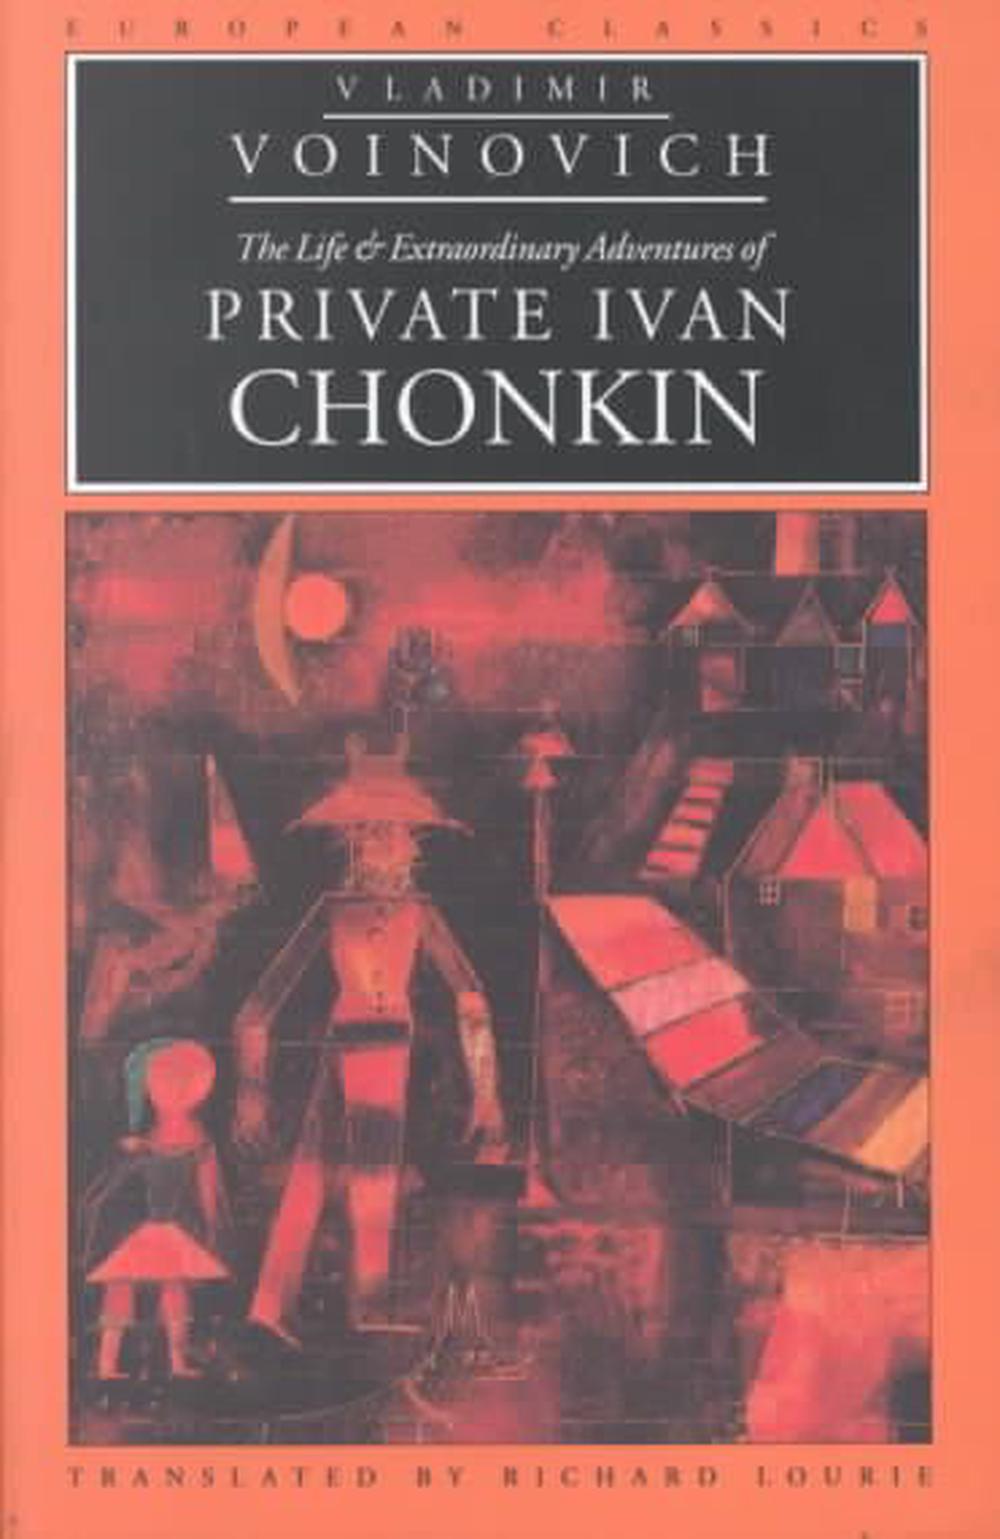 The Life and Extraordinary Adventures of Private Ivan Chonkin by